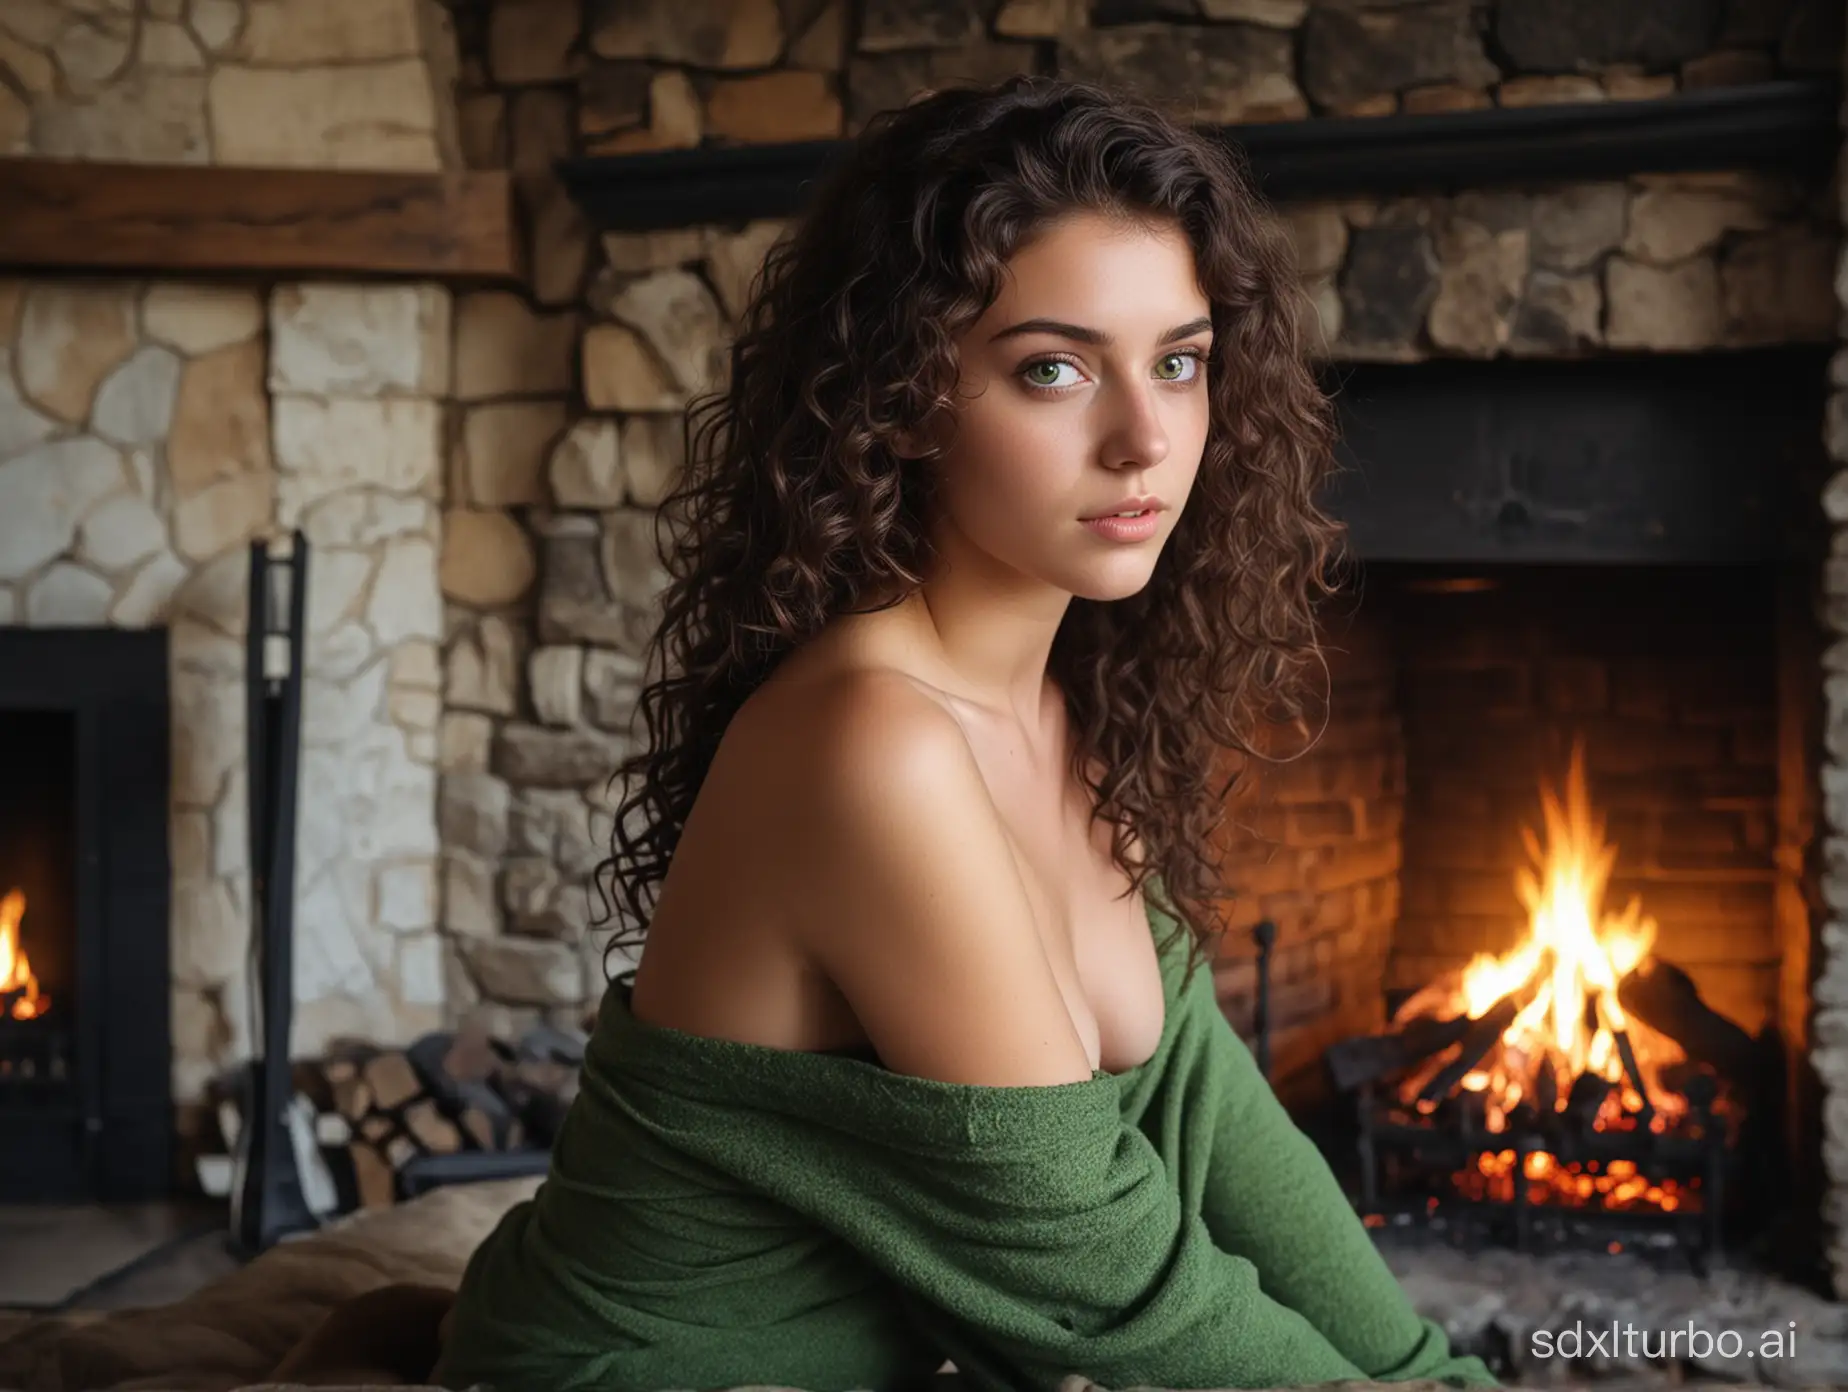 Beautiful girl 22 years old, green eyes sitting in front of a fire place at the old house black curly hairs body transparent clothes naked dreamy atmosphere,